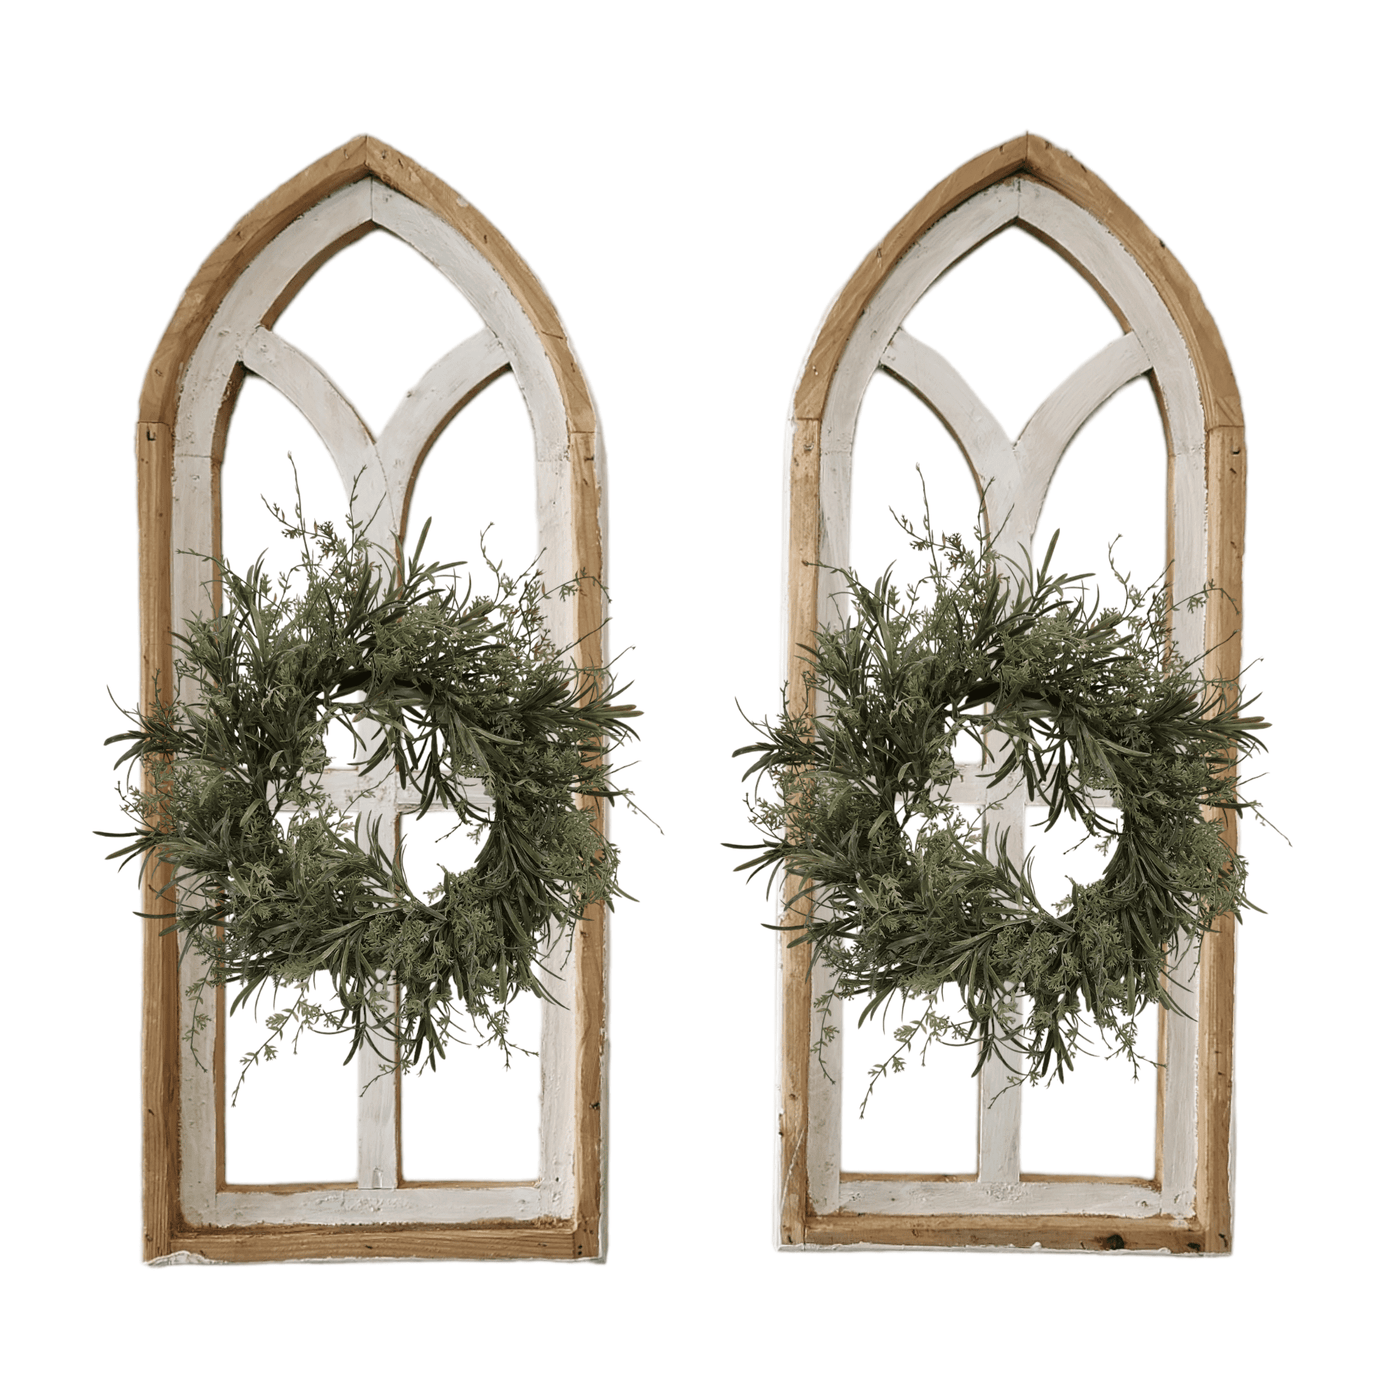 The Ivory Point Farmhouse Wooden Wall Window Arches Set of 2 -3 Sizes - Rustic Cathedral Wood Windows- Ivory Point wall windowsRanch Junkie